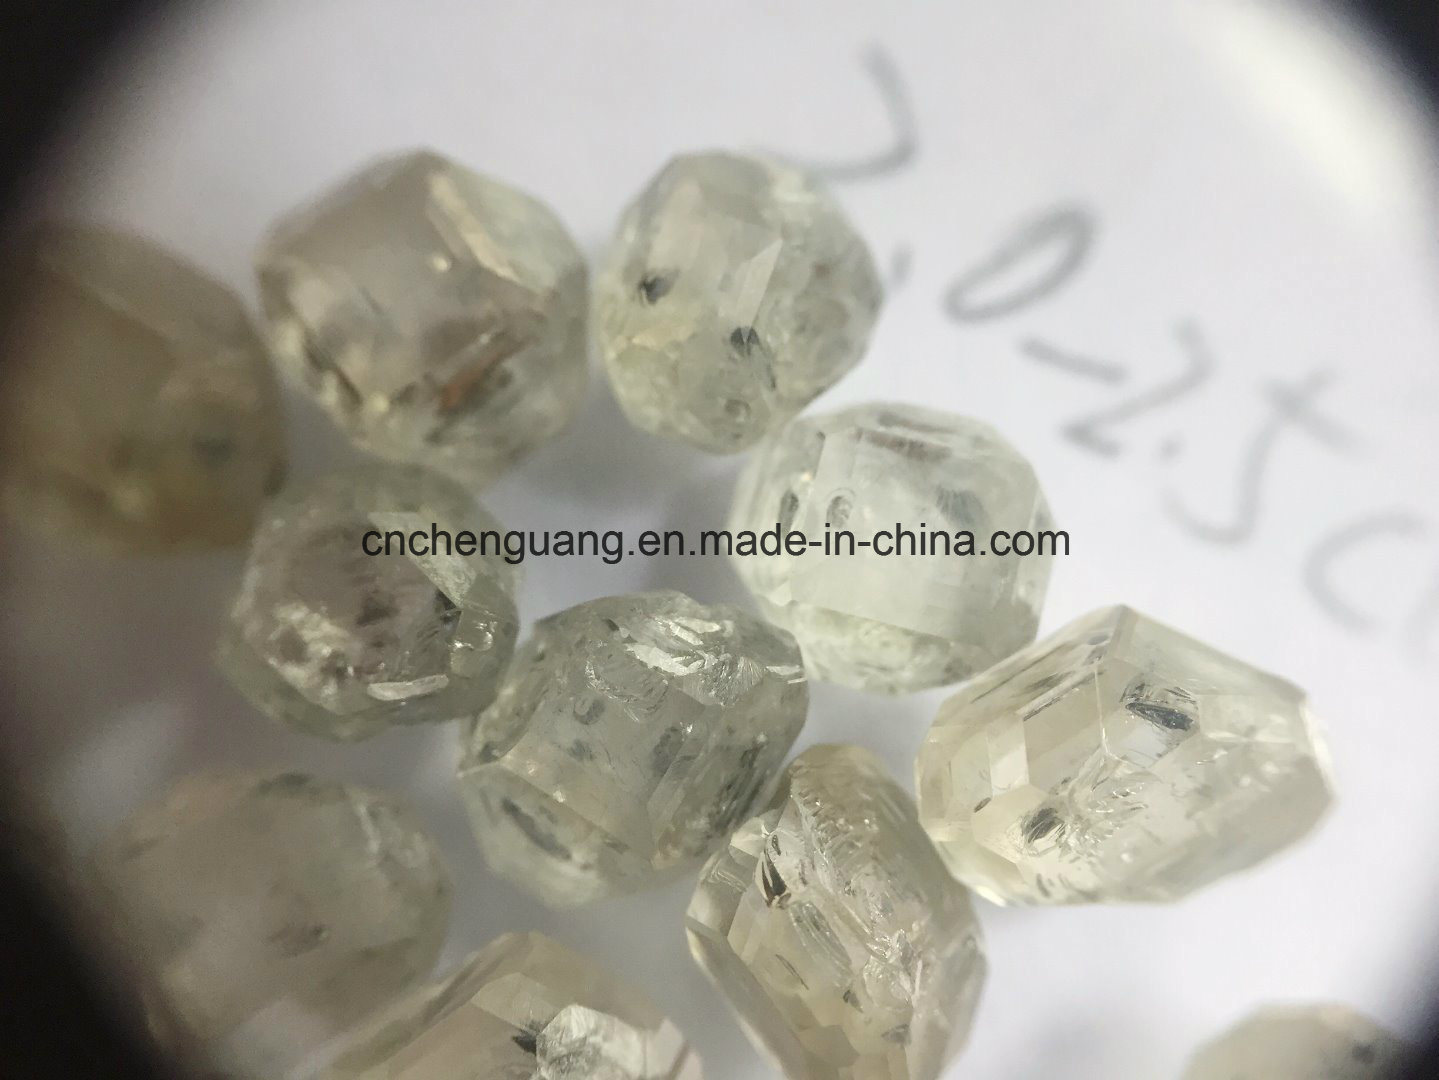 Big Size White Rough Diamond for jewelry or Industry Tools Hpht Diamond CVD Diamond